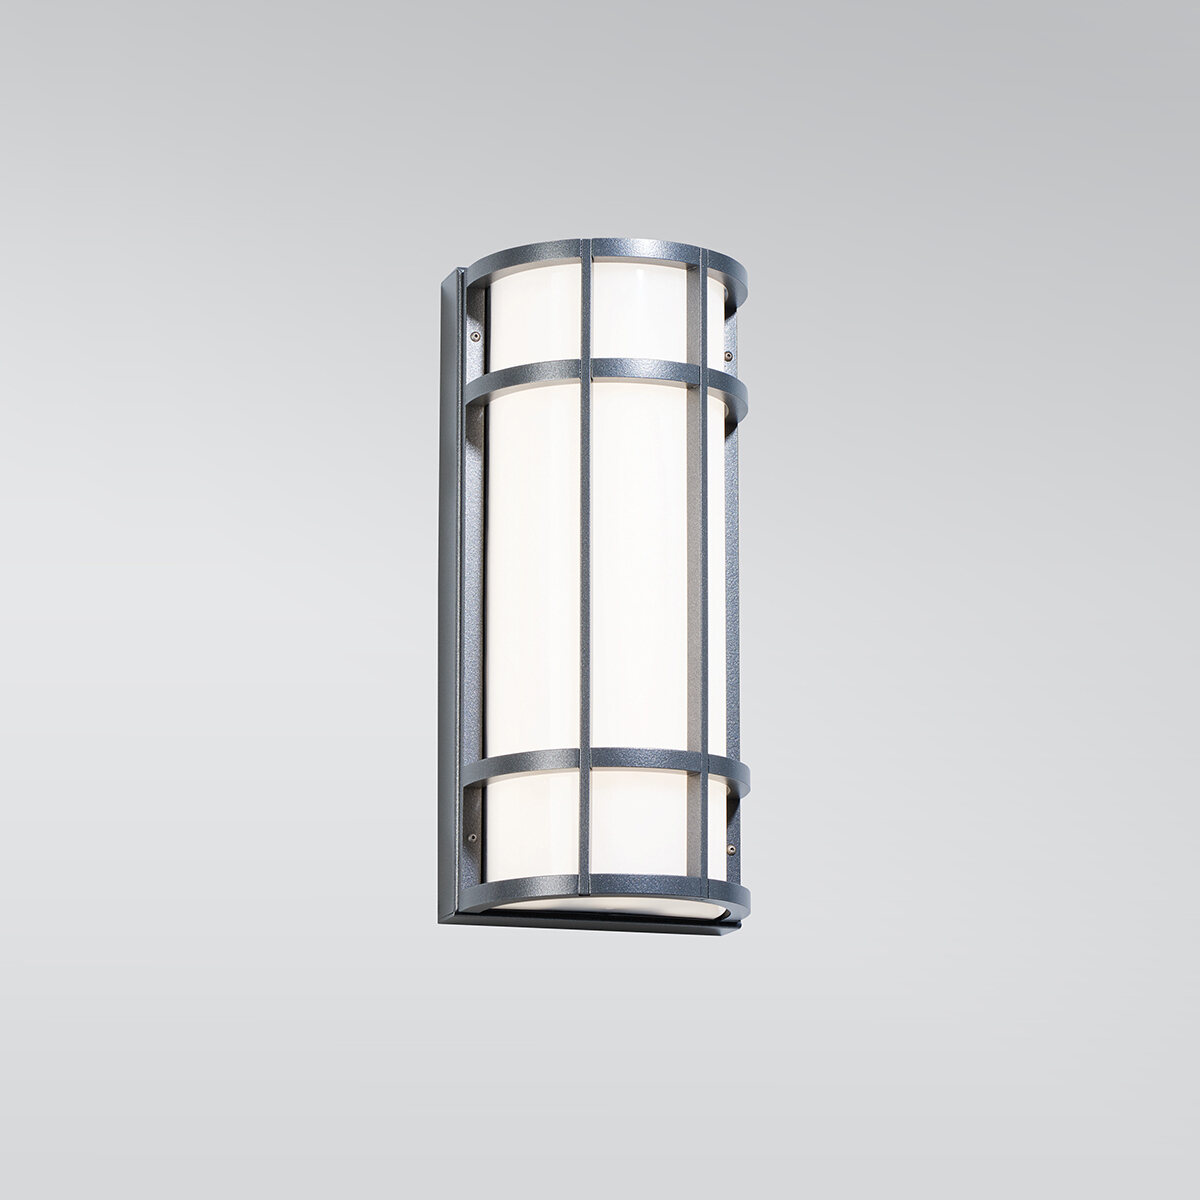 A rectangular outdoor wall sconce with cross bar accents